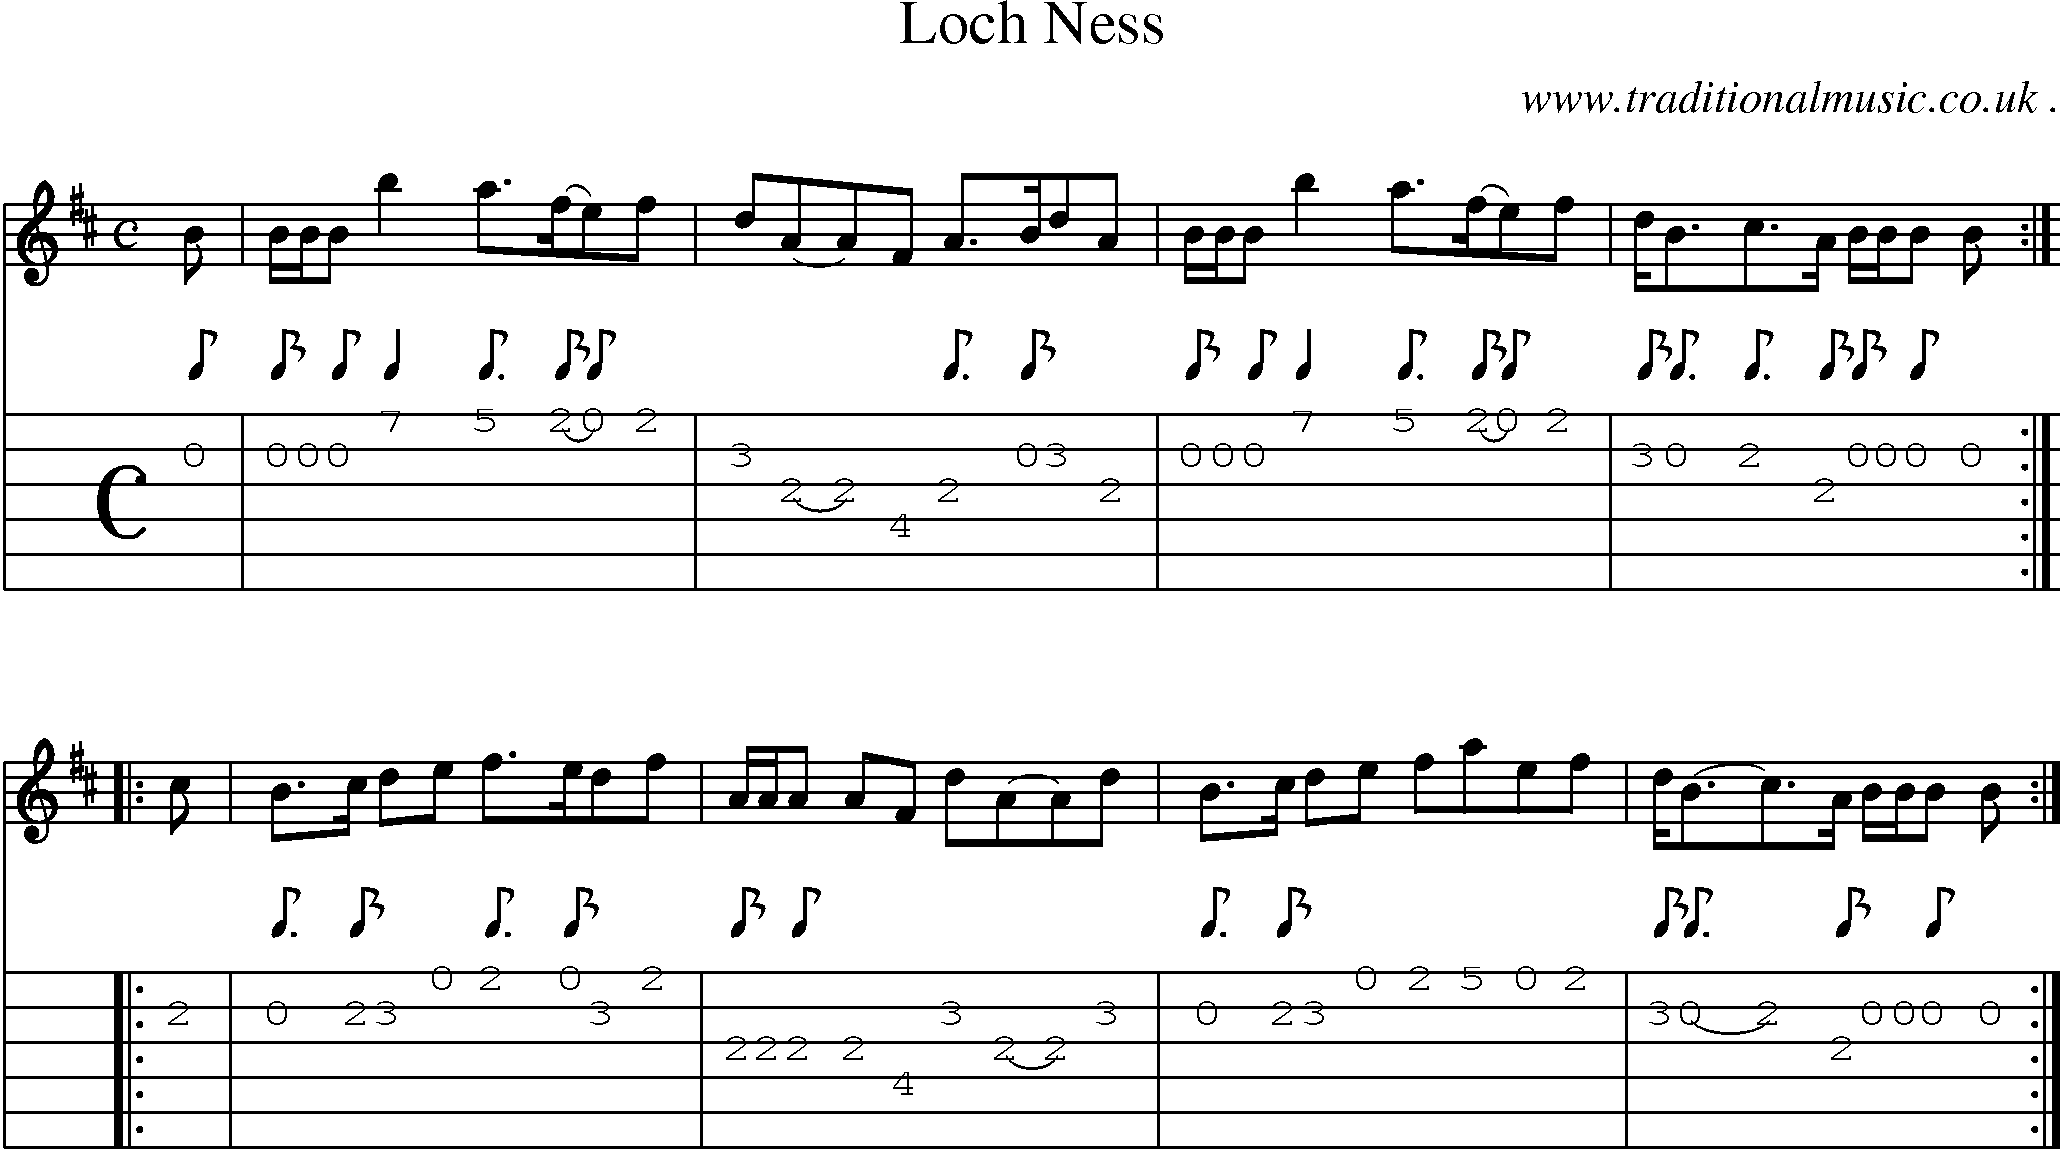 Sheet-Music and Guitar Tabs for Loch Ness